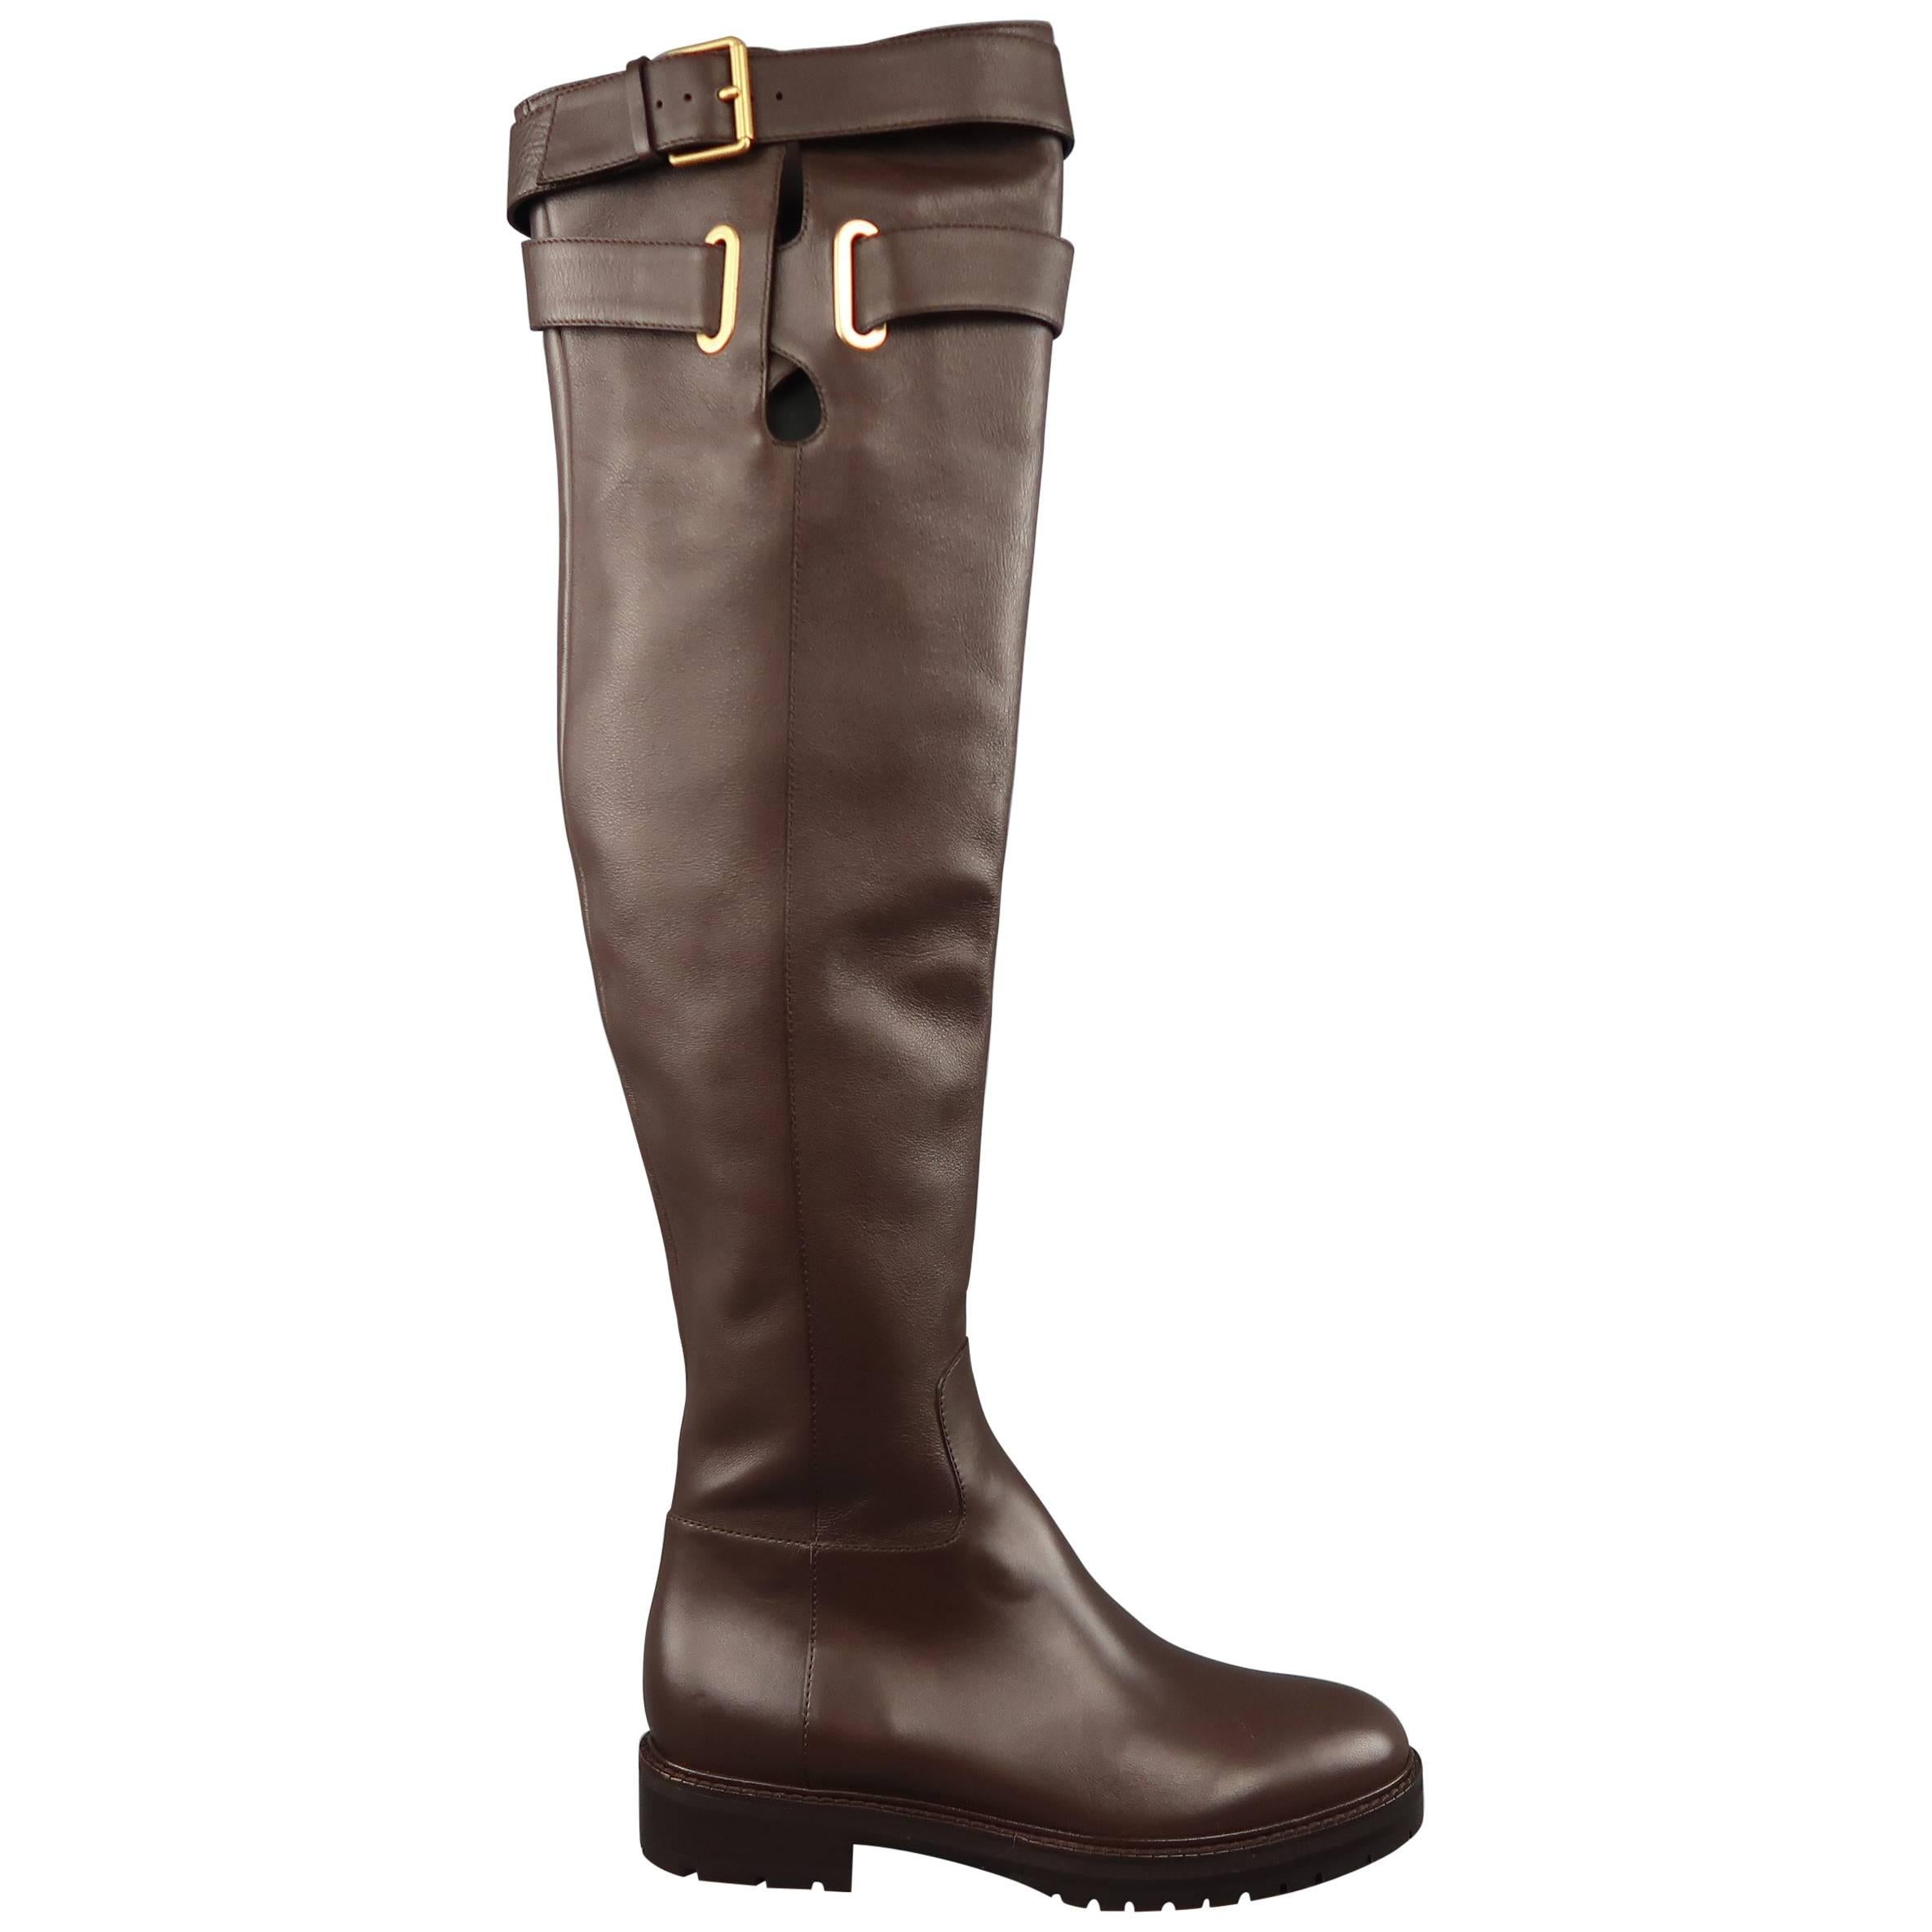 VALENTINO Leather Boots  - Size 8.5 Brown Over the Knee BOWRAP Riding 